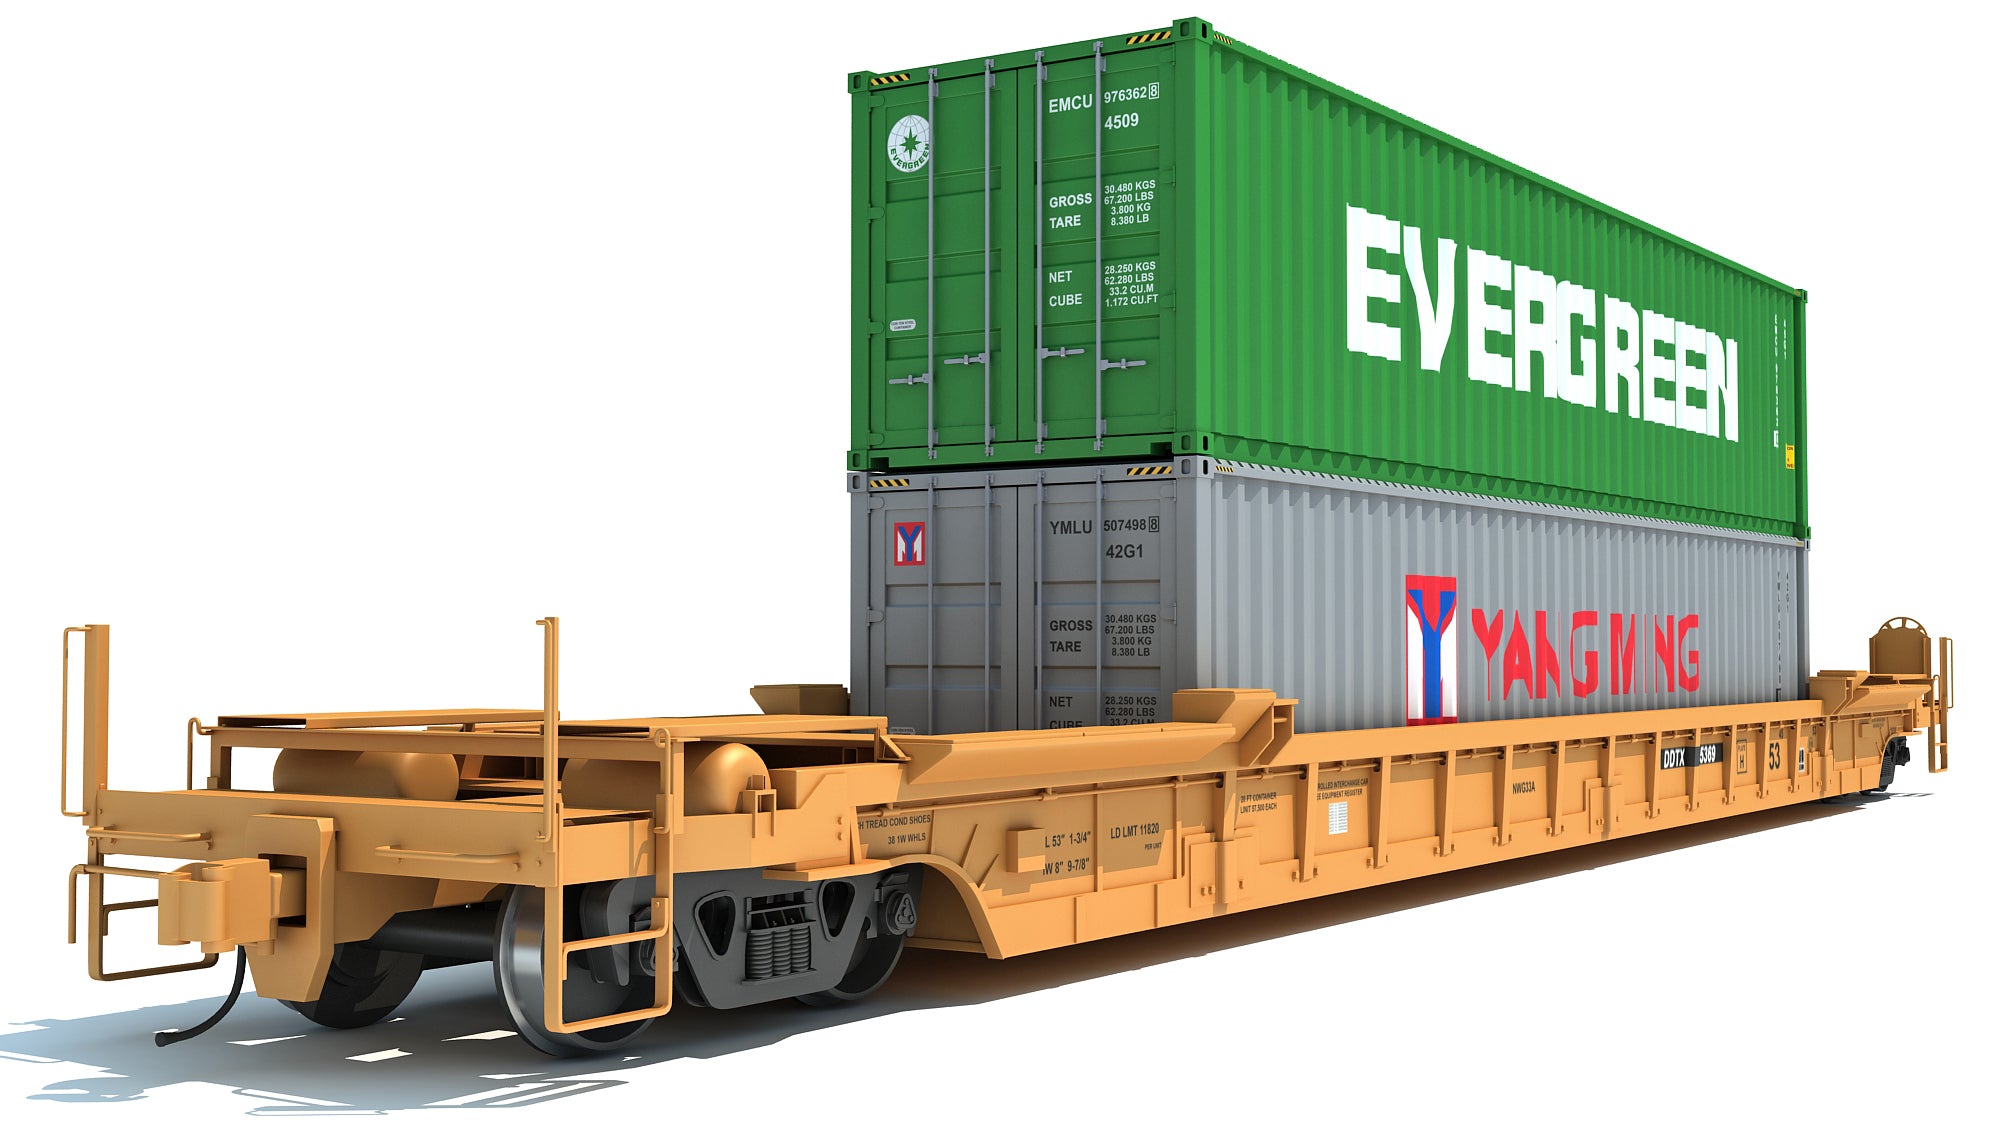 Train Car with Containers